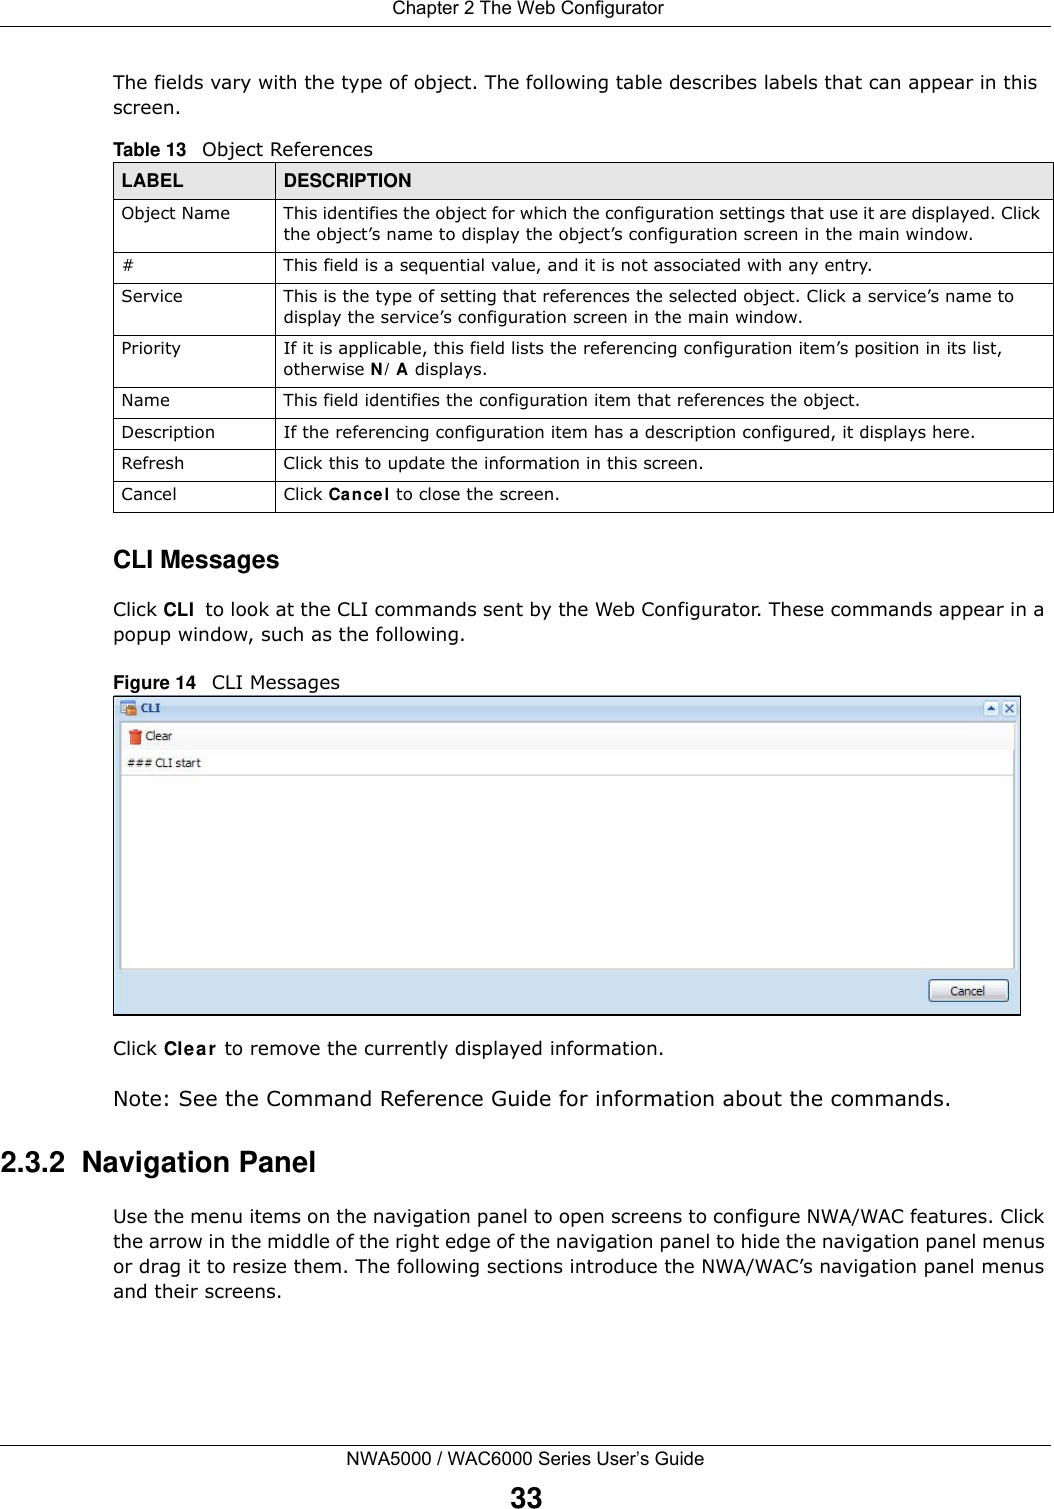  Chapter 2 The Web ConfiguratorNWA5000 / WAC6000 Series User’s Guide33The fields vary with the type of object. The following table describes labels that can appear in this screen.CLI MessagesClick CLI to look at the CLI commands sent by the Web Configurator. These commands appear in a popup window, such as the following.Figure 14   CLI MessagesClick Clear to remove the currently displayed information.Note: See the Command Reference Guide for information about the commands.2.3.2  Navigation PanelUse the menu items on the navigation panel to open screens to configure NWA/WAC features. Click the arrow in the middle of the right edge of the navigation panel to hide the navigation panel menus or drag it to resize them. The following sections introduce the NWA/WAC’s navigation panel menus and their screens.Table 13   Object ReferencesLABEL DESCRIPTIONObject Name This identifies the object for which the configuration settings that use it are displayed. Click the object’s name to display the object’s configuration screen in the main window.# This field is a sequential value, and it is not associated with any entry.Service This is the type of setting that references the selected object. Click a service’s name to display the service’s configuration screen in the main window.Priority If it is applicable, this field lists the referencing configuration item’s position in its list, otherwise N/A displays.Name This field identifies the configuration item that references the object.Description If the referencing configuration item has a description configured, it displays here. Refresh Click this to update the information in this screen.Cancel Click Cancel to close the screen.